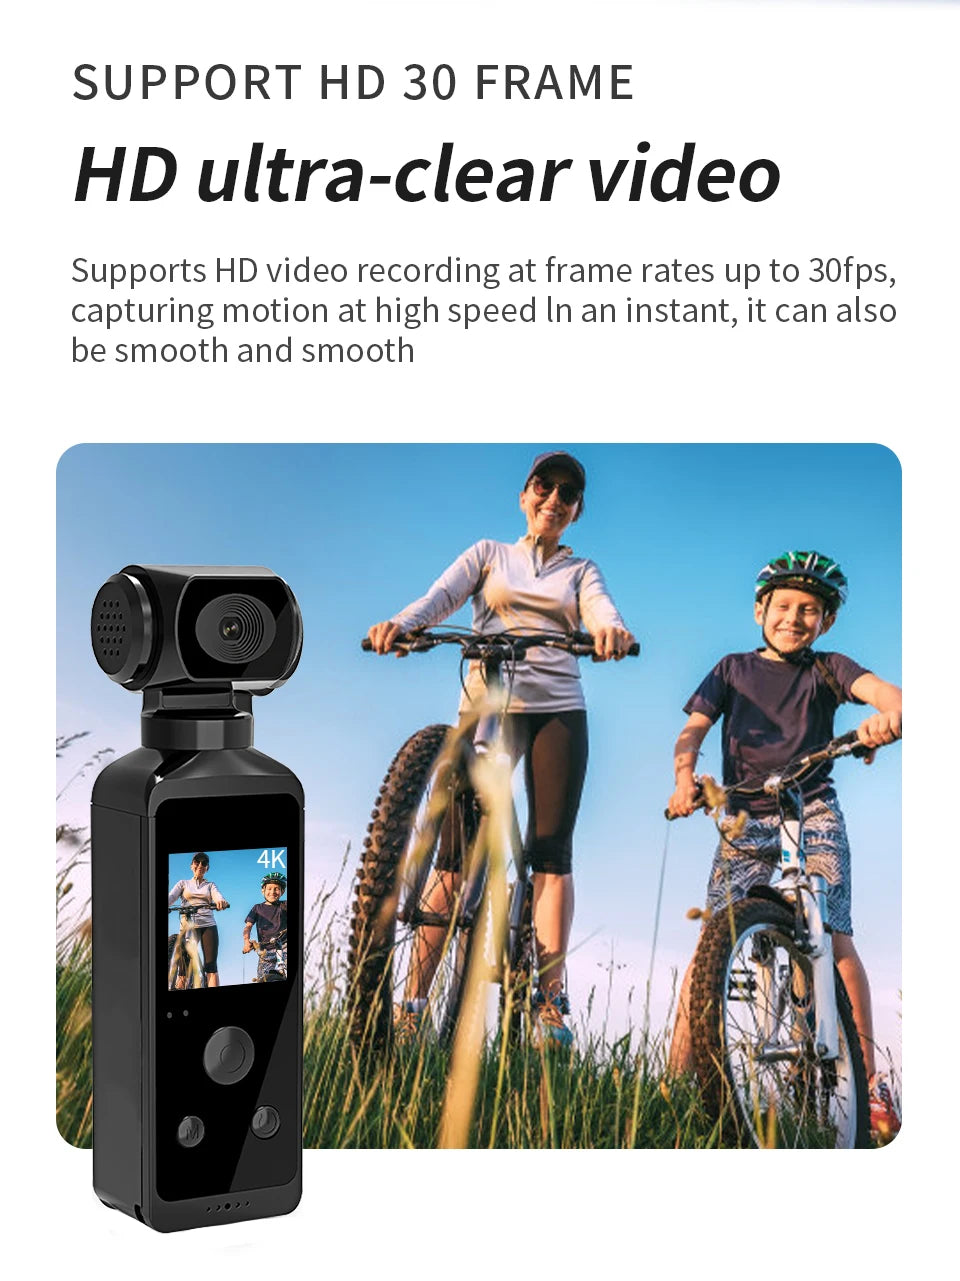 4K HD Pocket Action Camera, SUPPORT HD 30 FRAME HD ultra-clear video captures motion at high speed